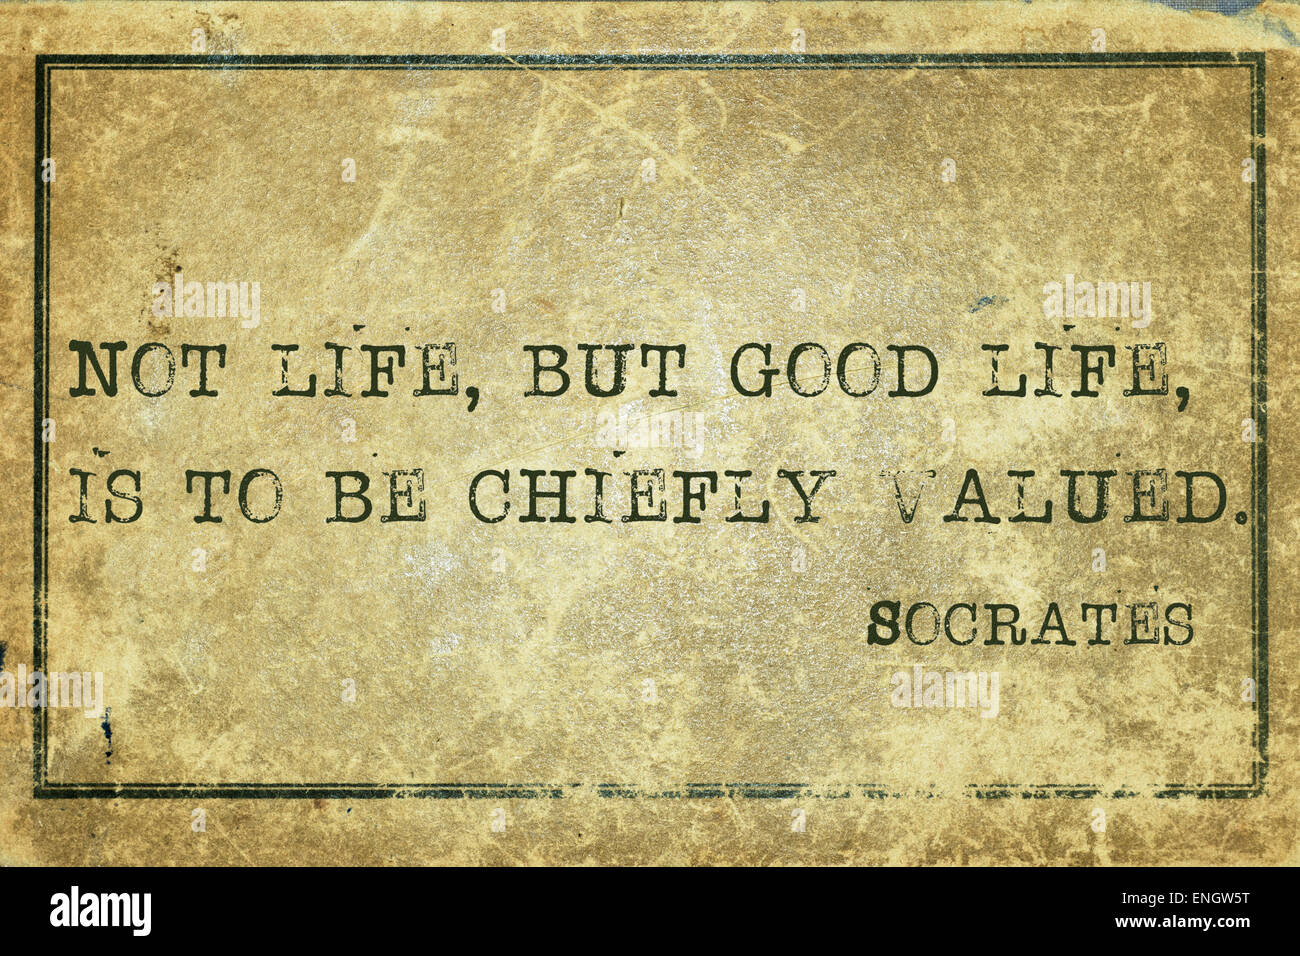 Not life, but good life - ancient Greek philosopher Socrates quote printed on grunge vintage cardboard Stock Photo